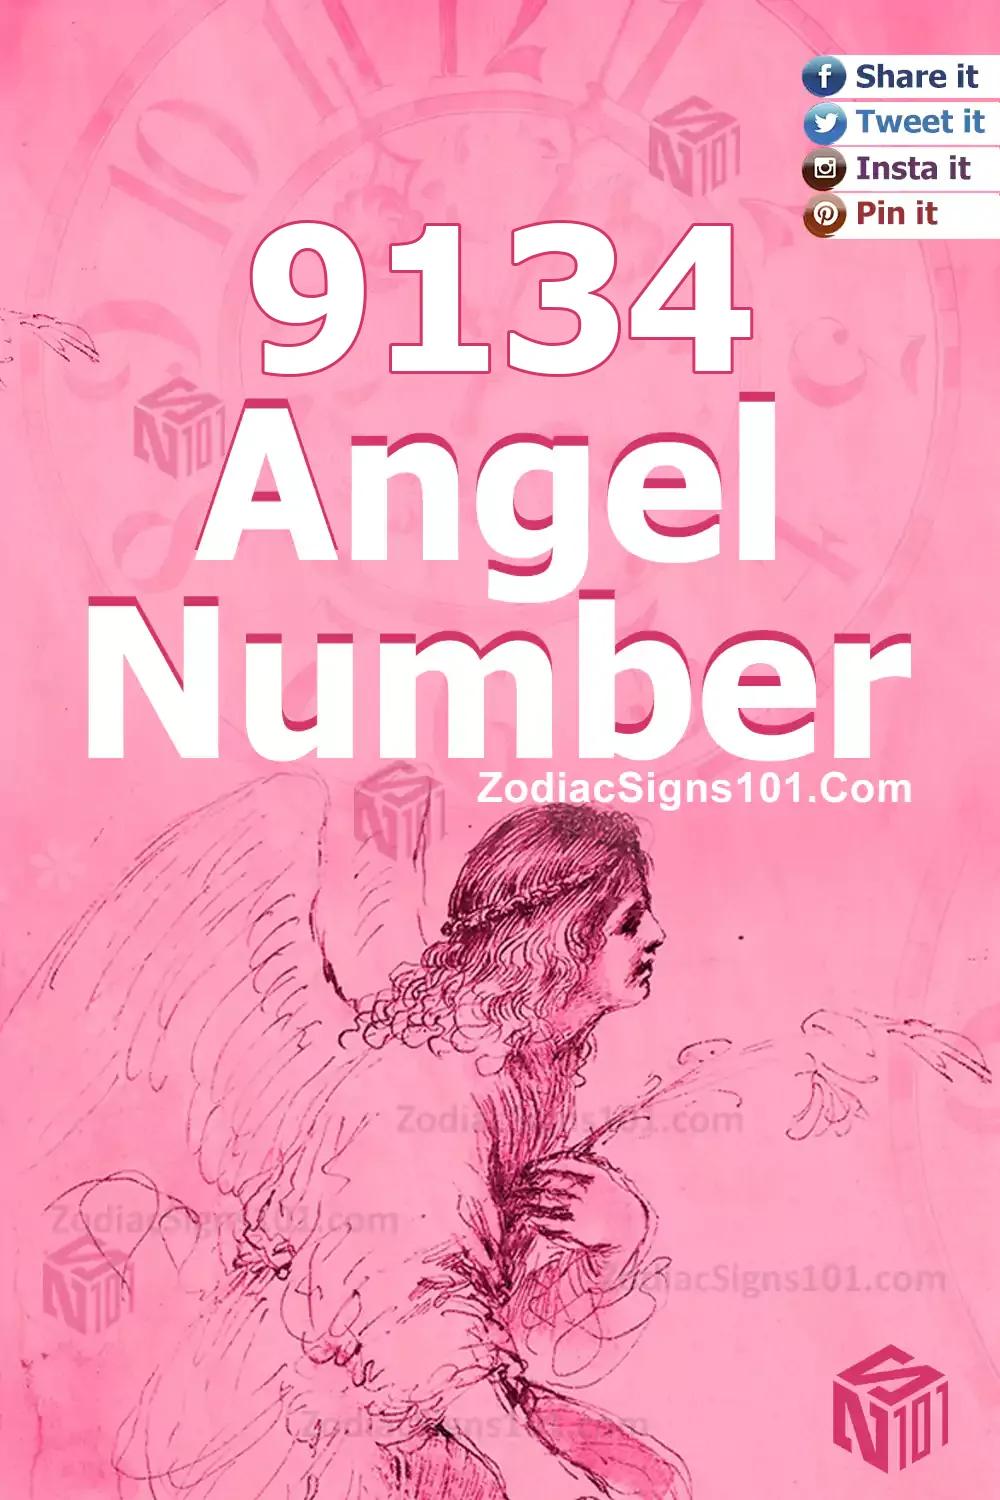 9134 Angel Number Meaning